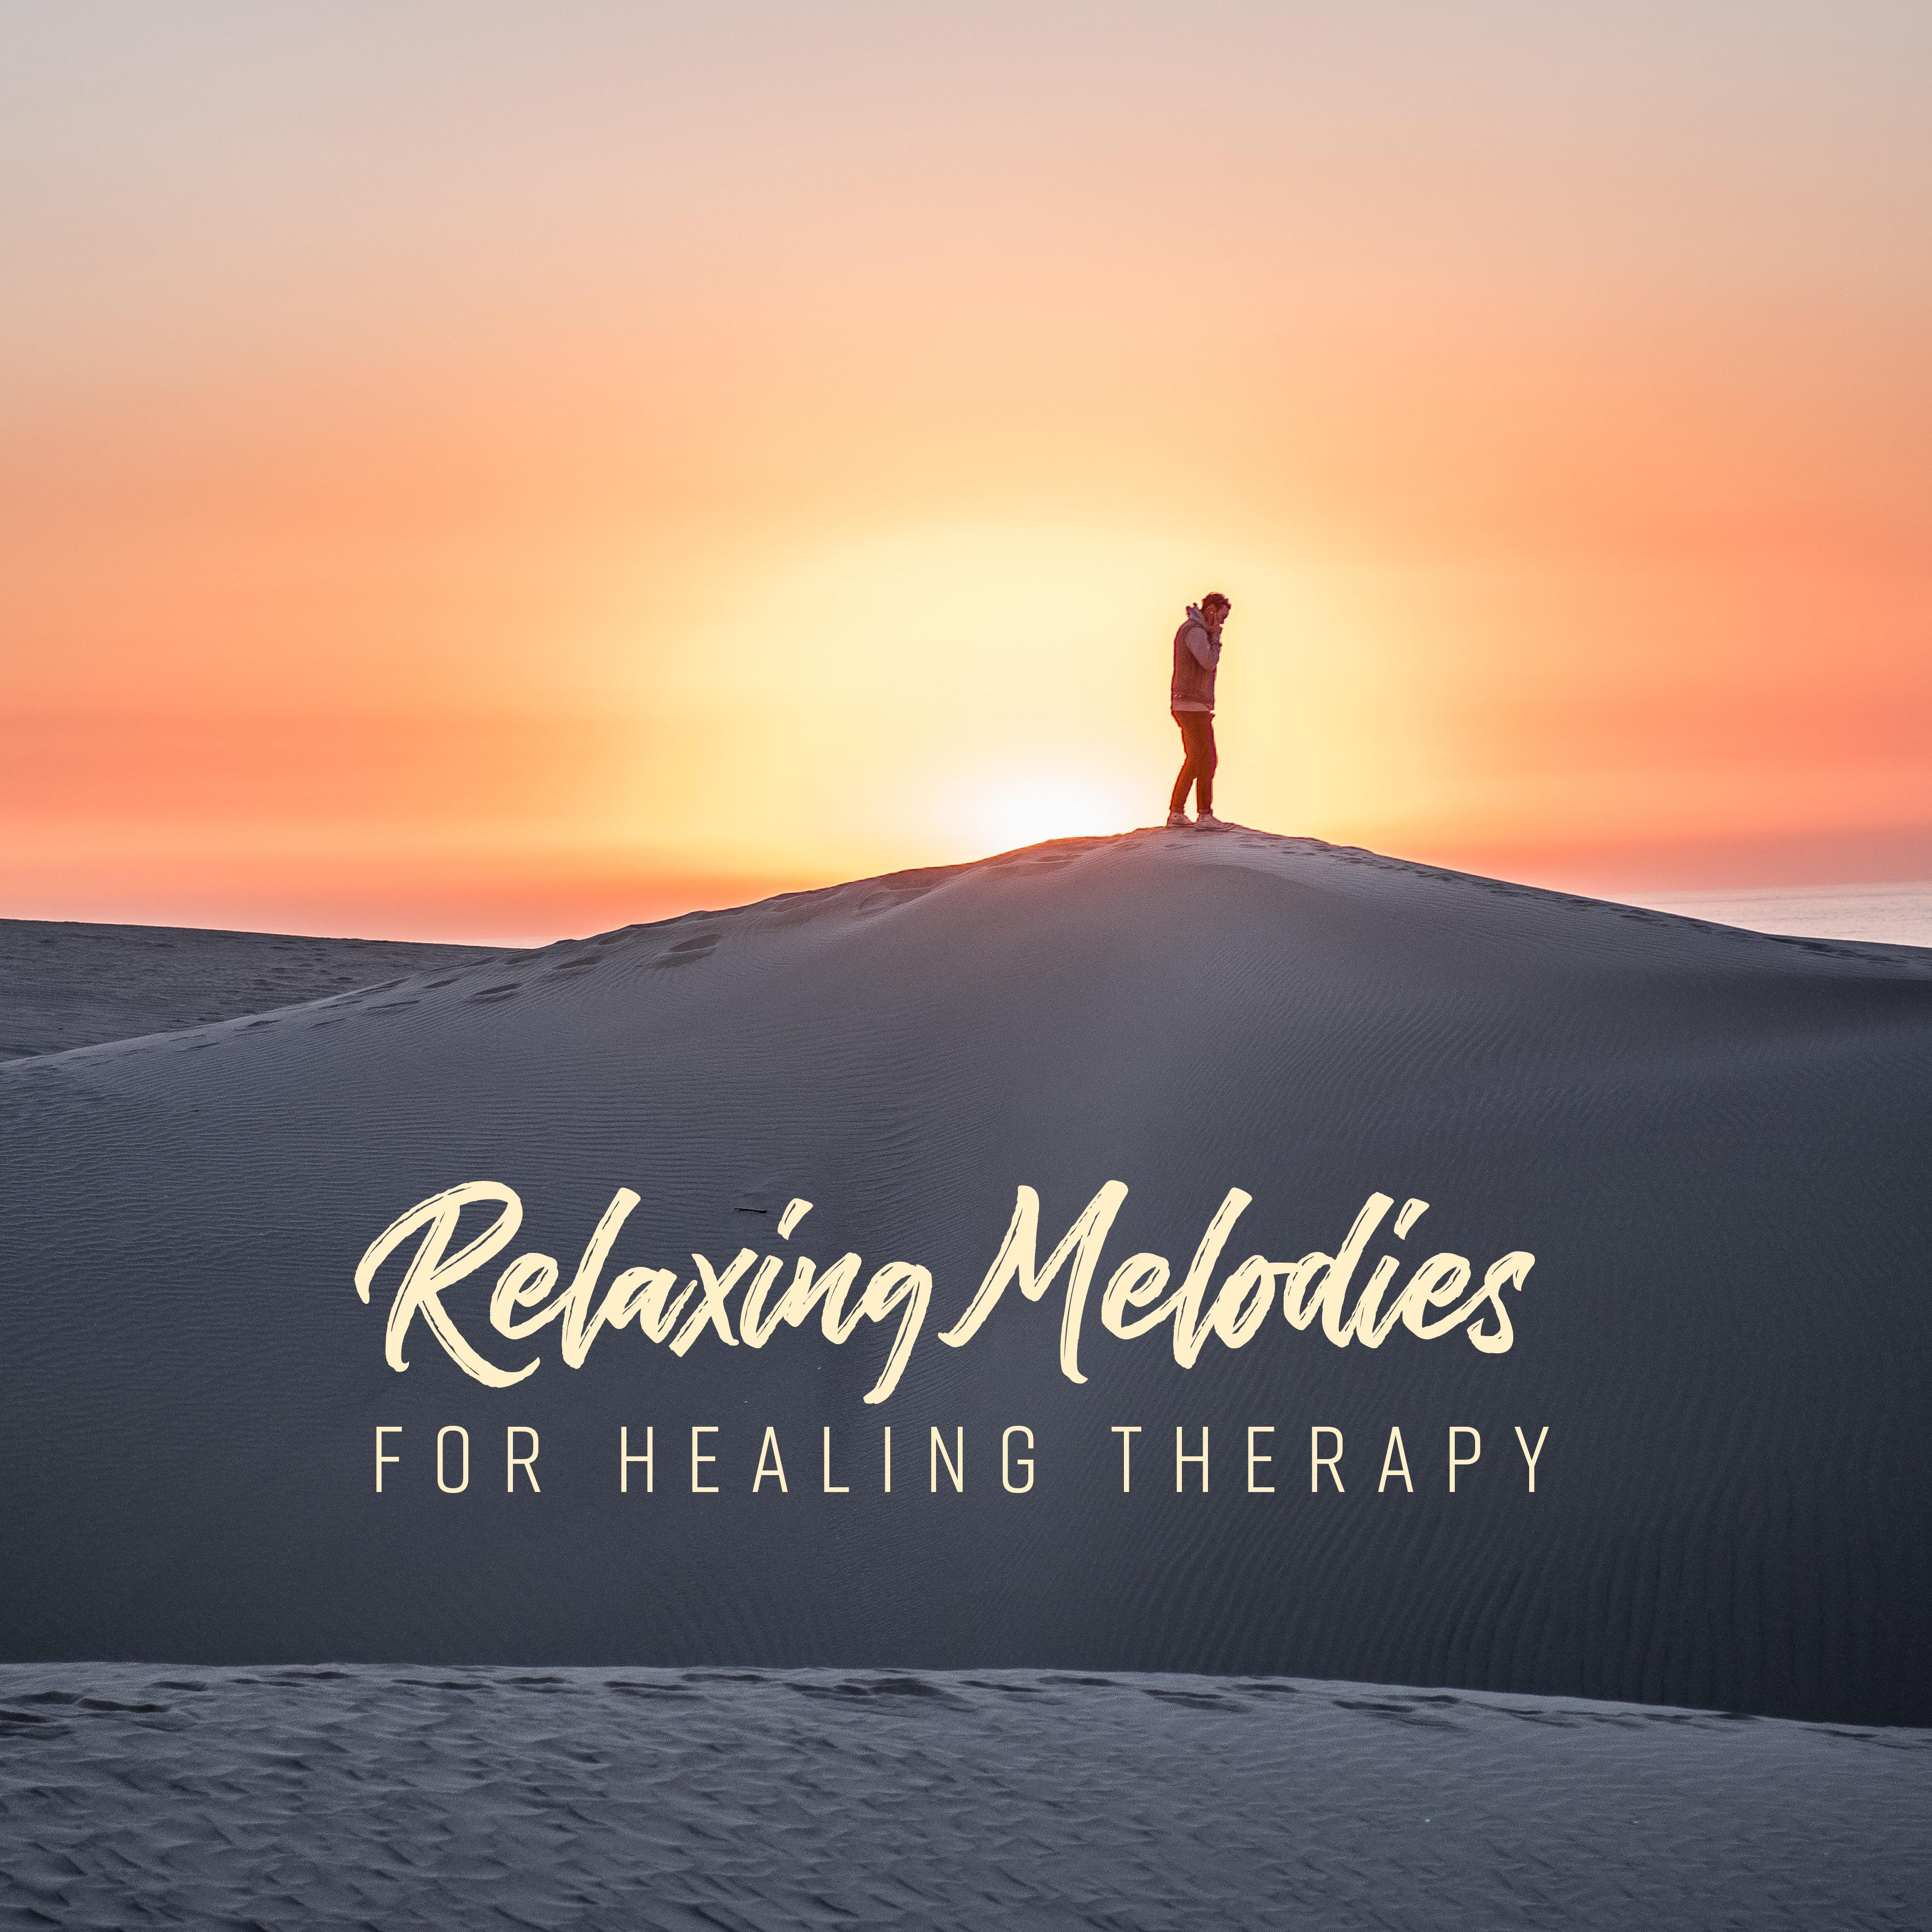 Relaxing Melodies for Healing Therapy